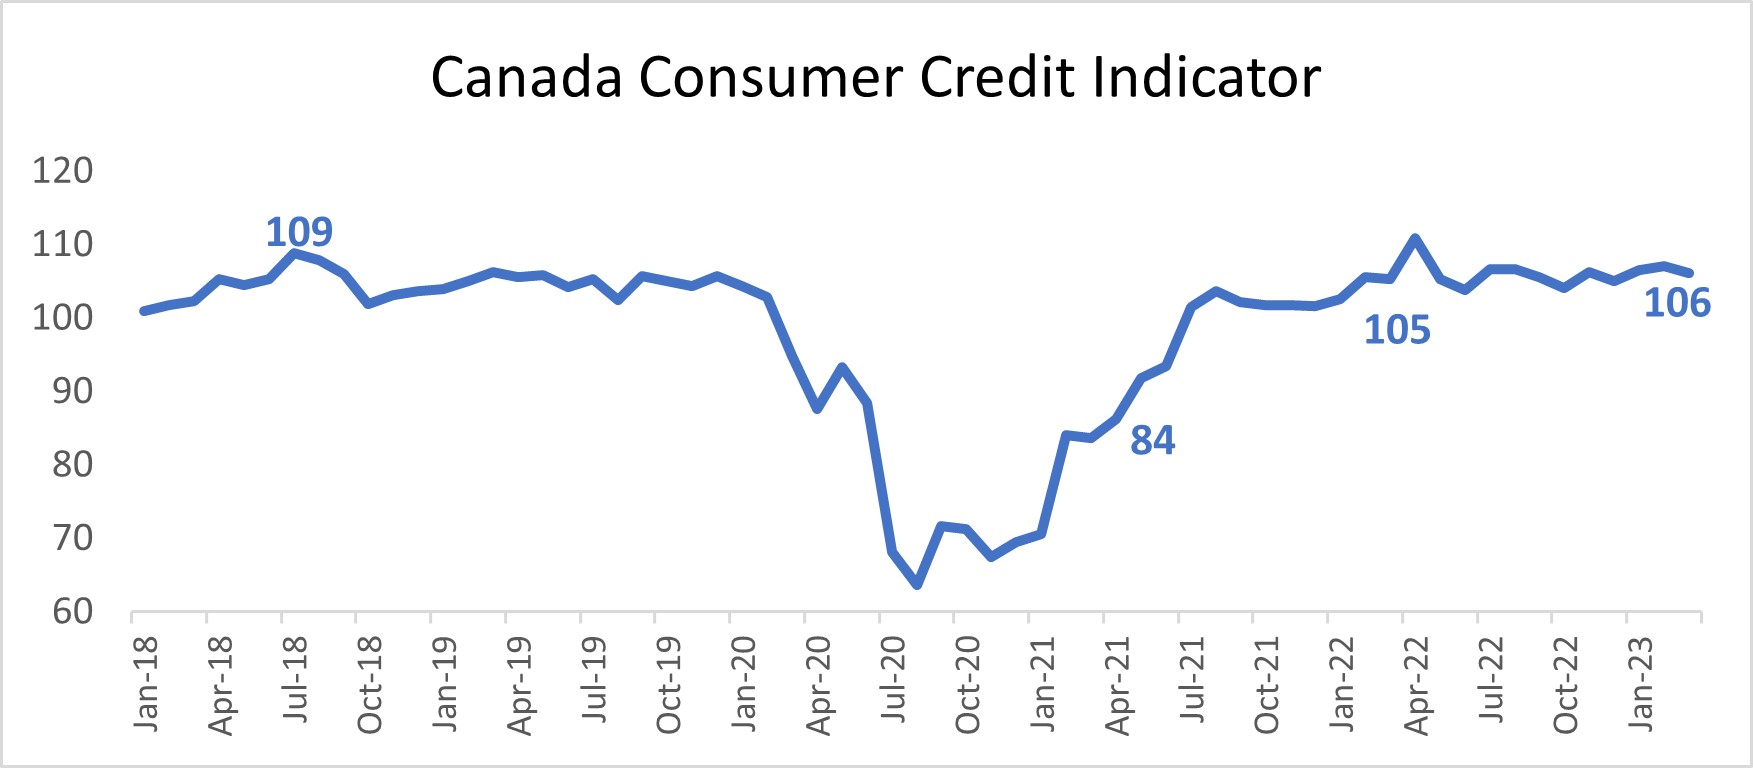 Source: TransUnion Canada consumer credit database. (i) A lower CII number compared to the prior period represents a decline in credit health, while a higher number reflects an improvement. The CII number needs to be looked at in relation to the previous period(s) and not in isolation. In March 2023, the CII of 106 represented an improvement in credit health compared to the same month prior year (March 2022) and a slight increase in credit health compared to the prior quarter (December 2022).